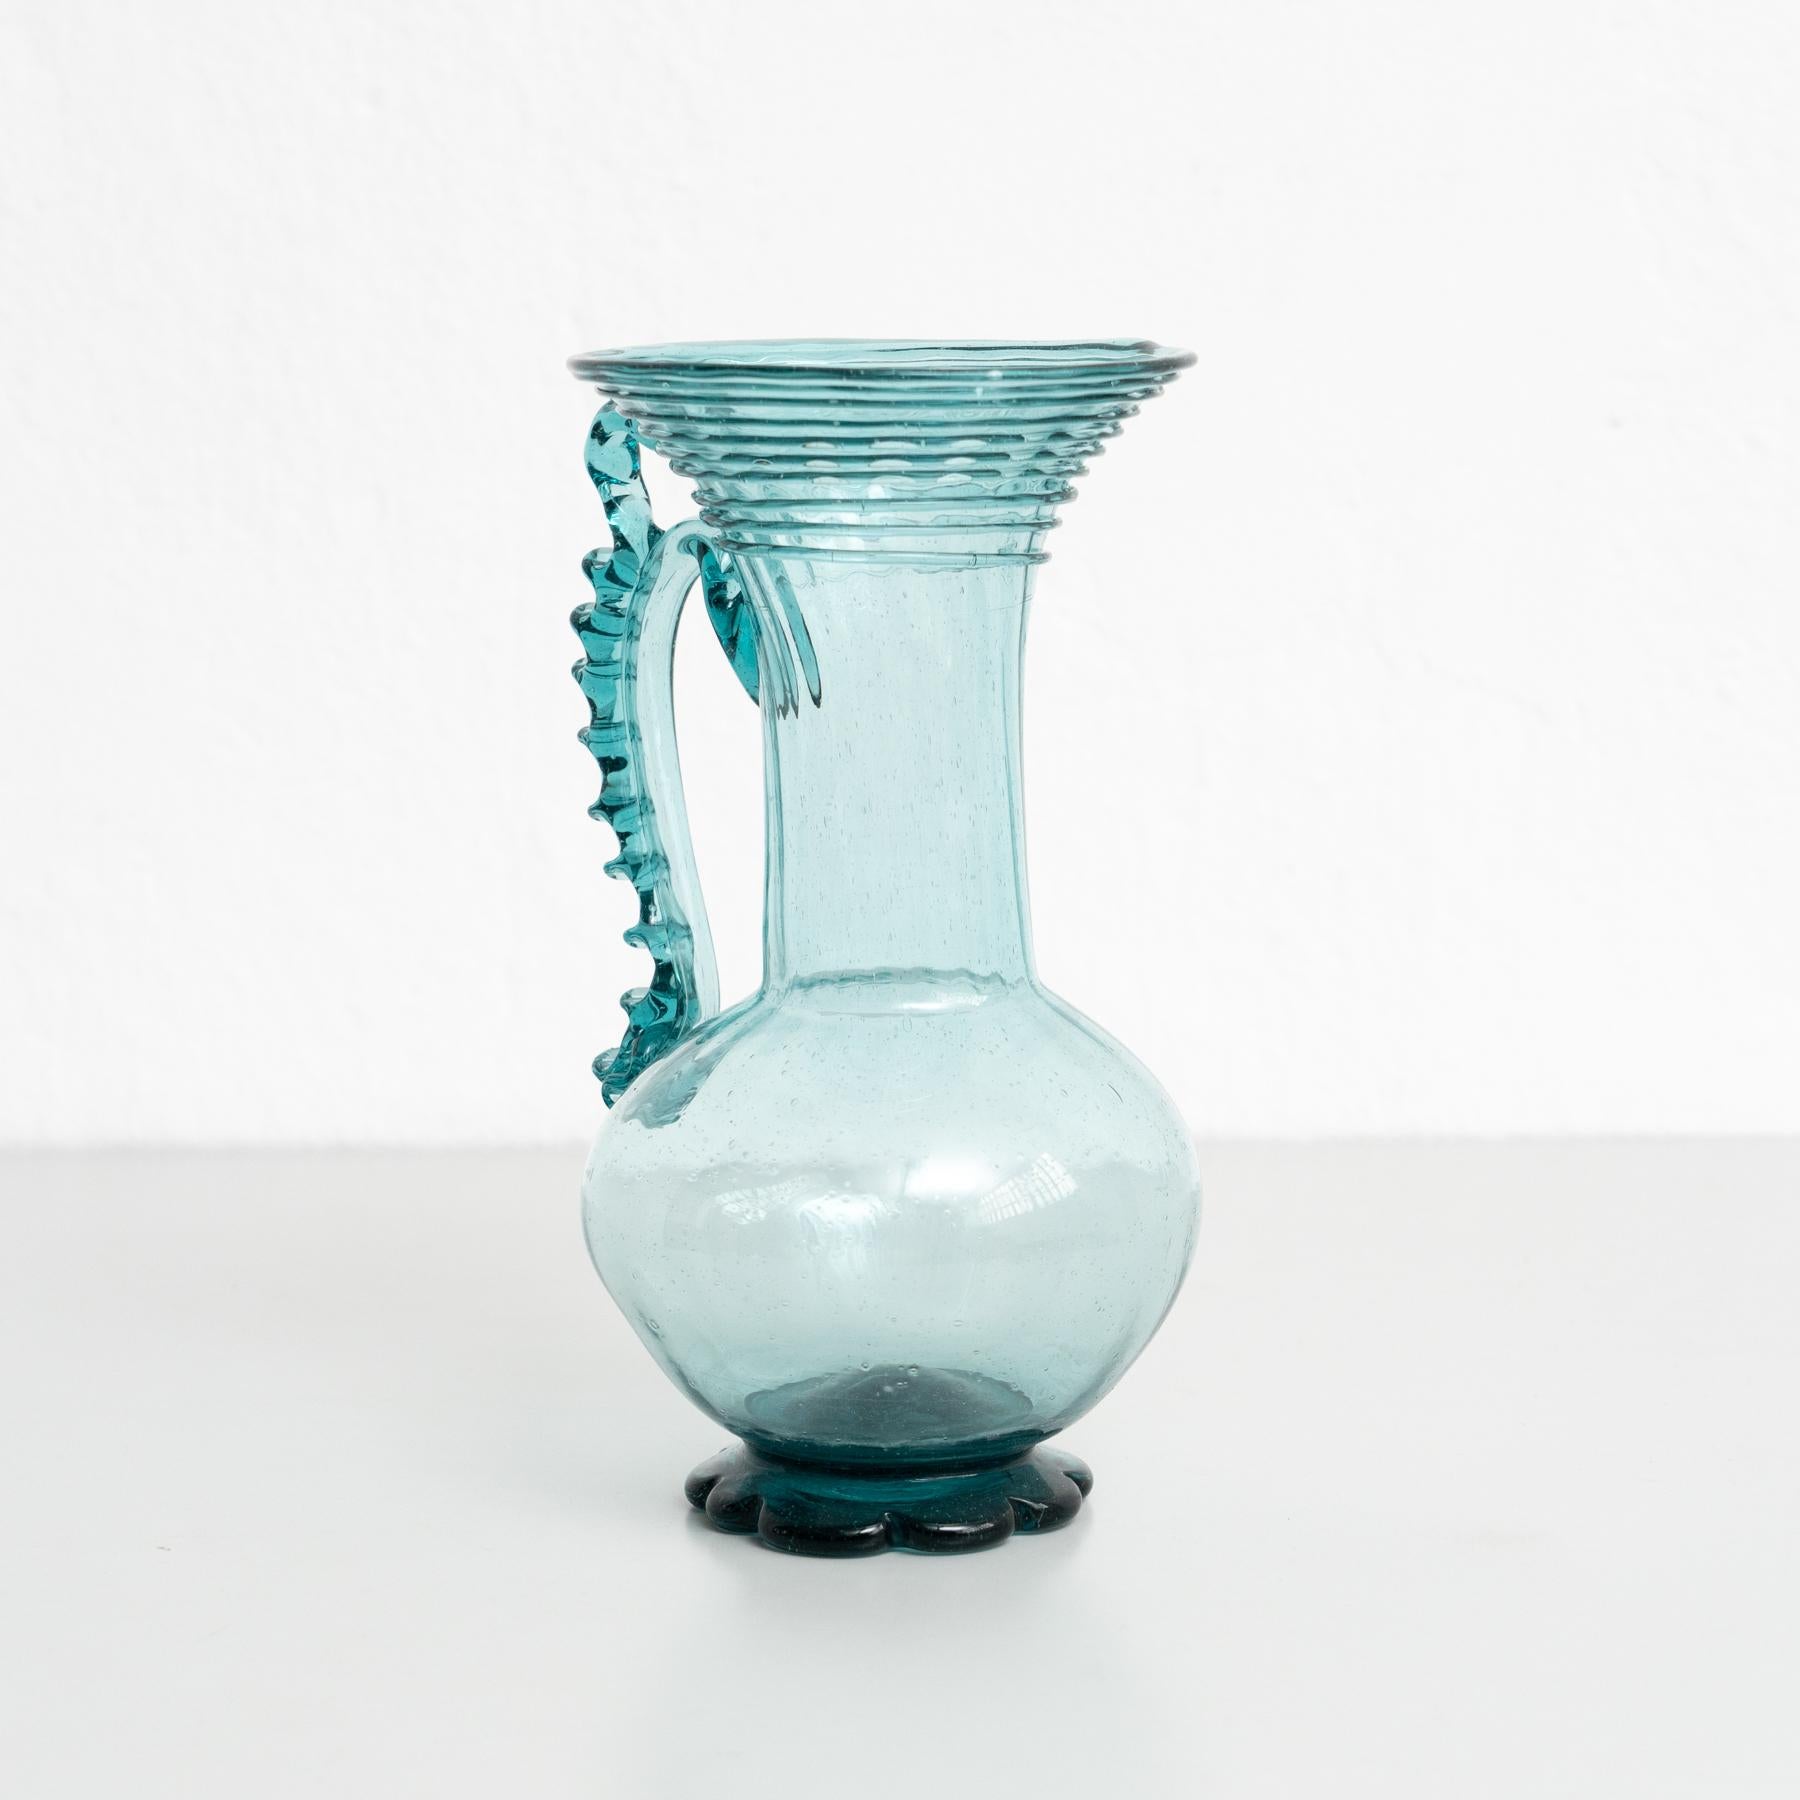 Exceptional Blown Glass Vase - Early XXth Century - Spanish Craftsmanship For Sale 1